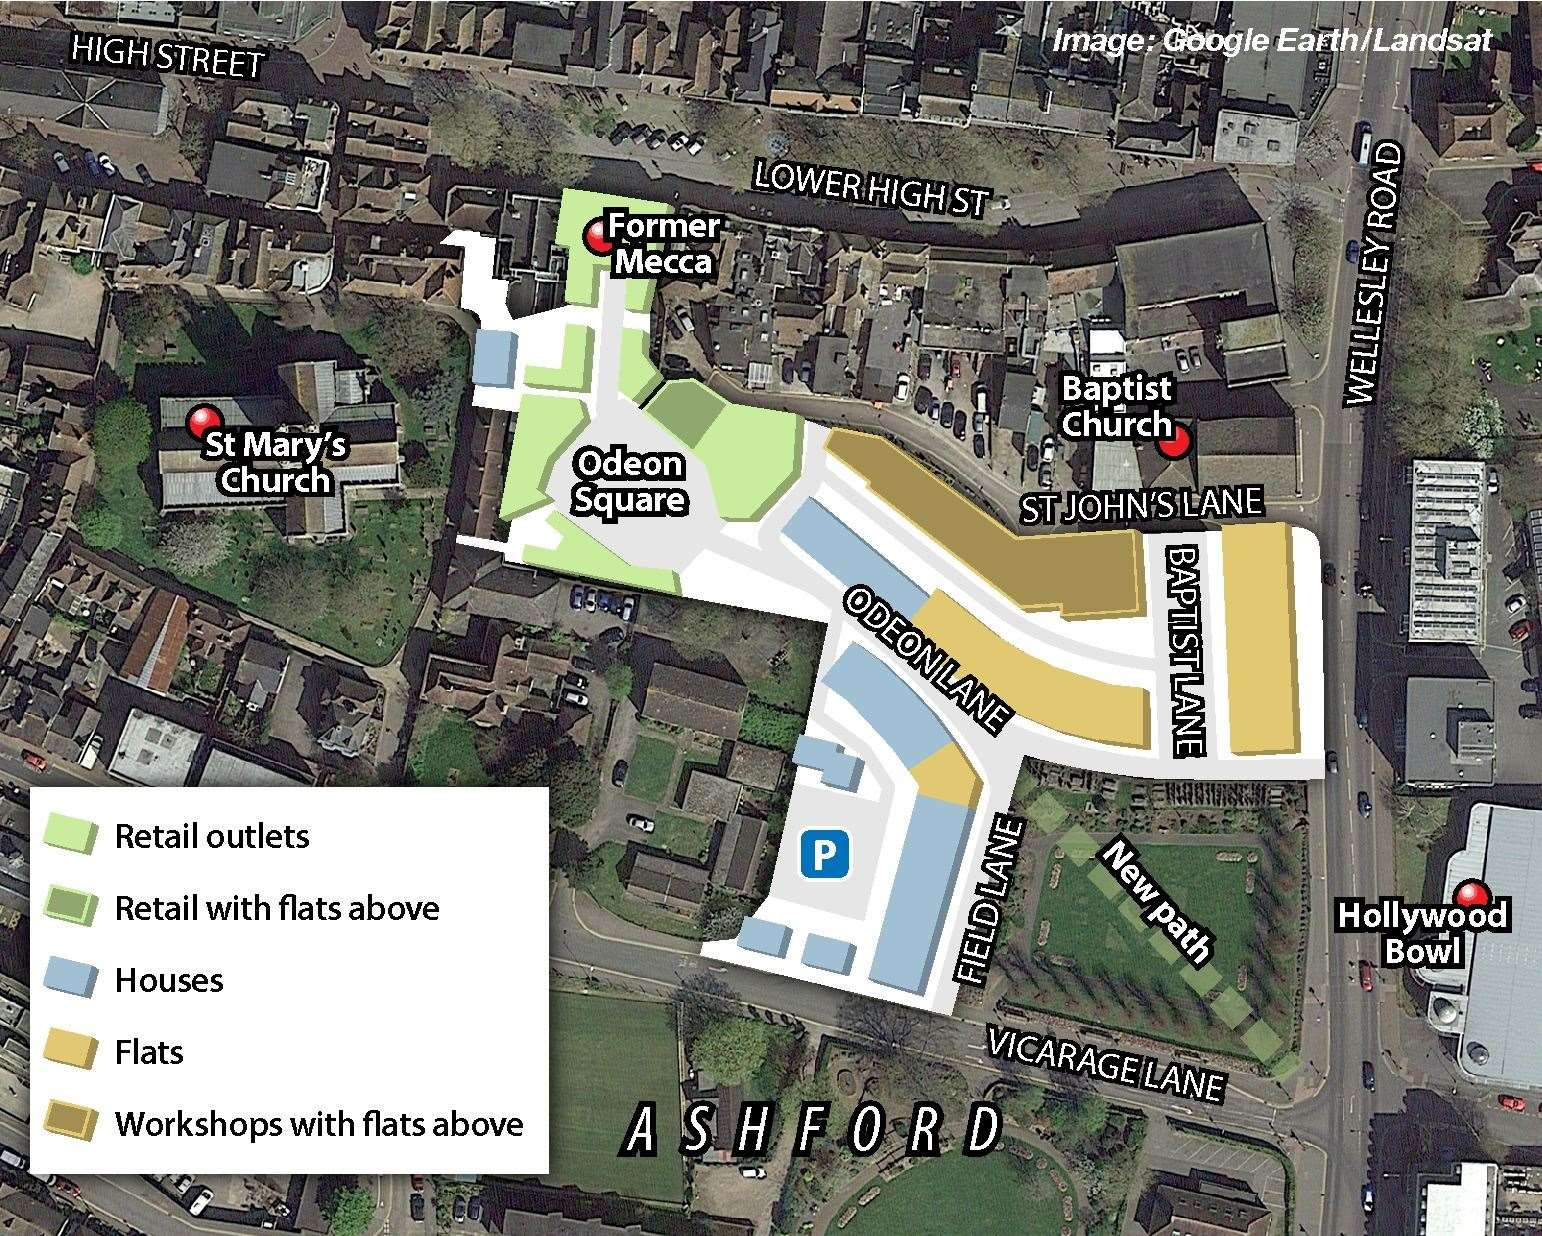 Ashford Borough Council's plans for the 'Odeon Square' site